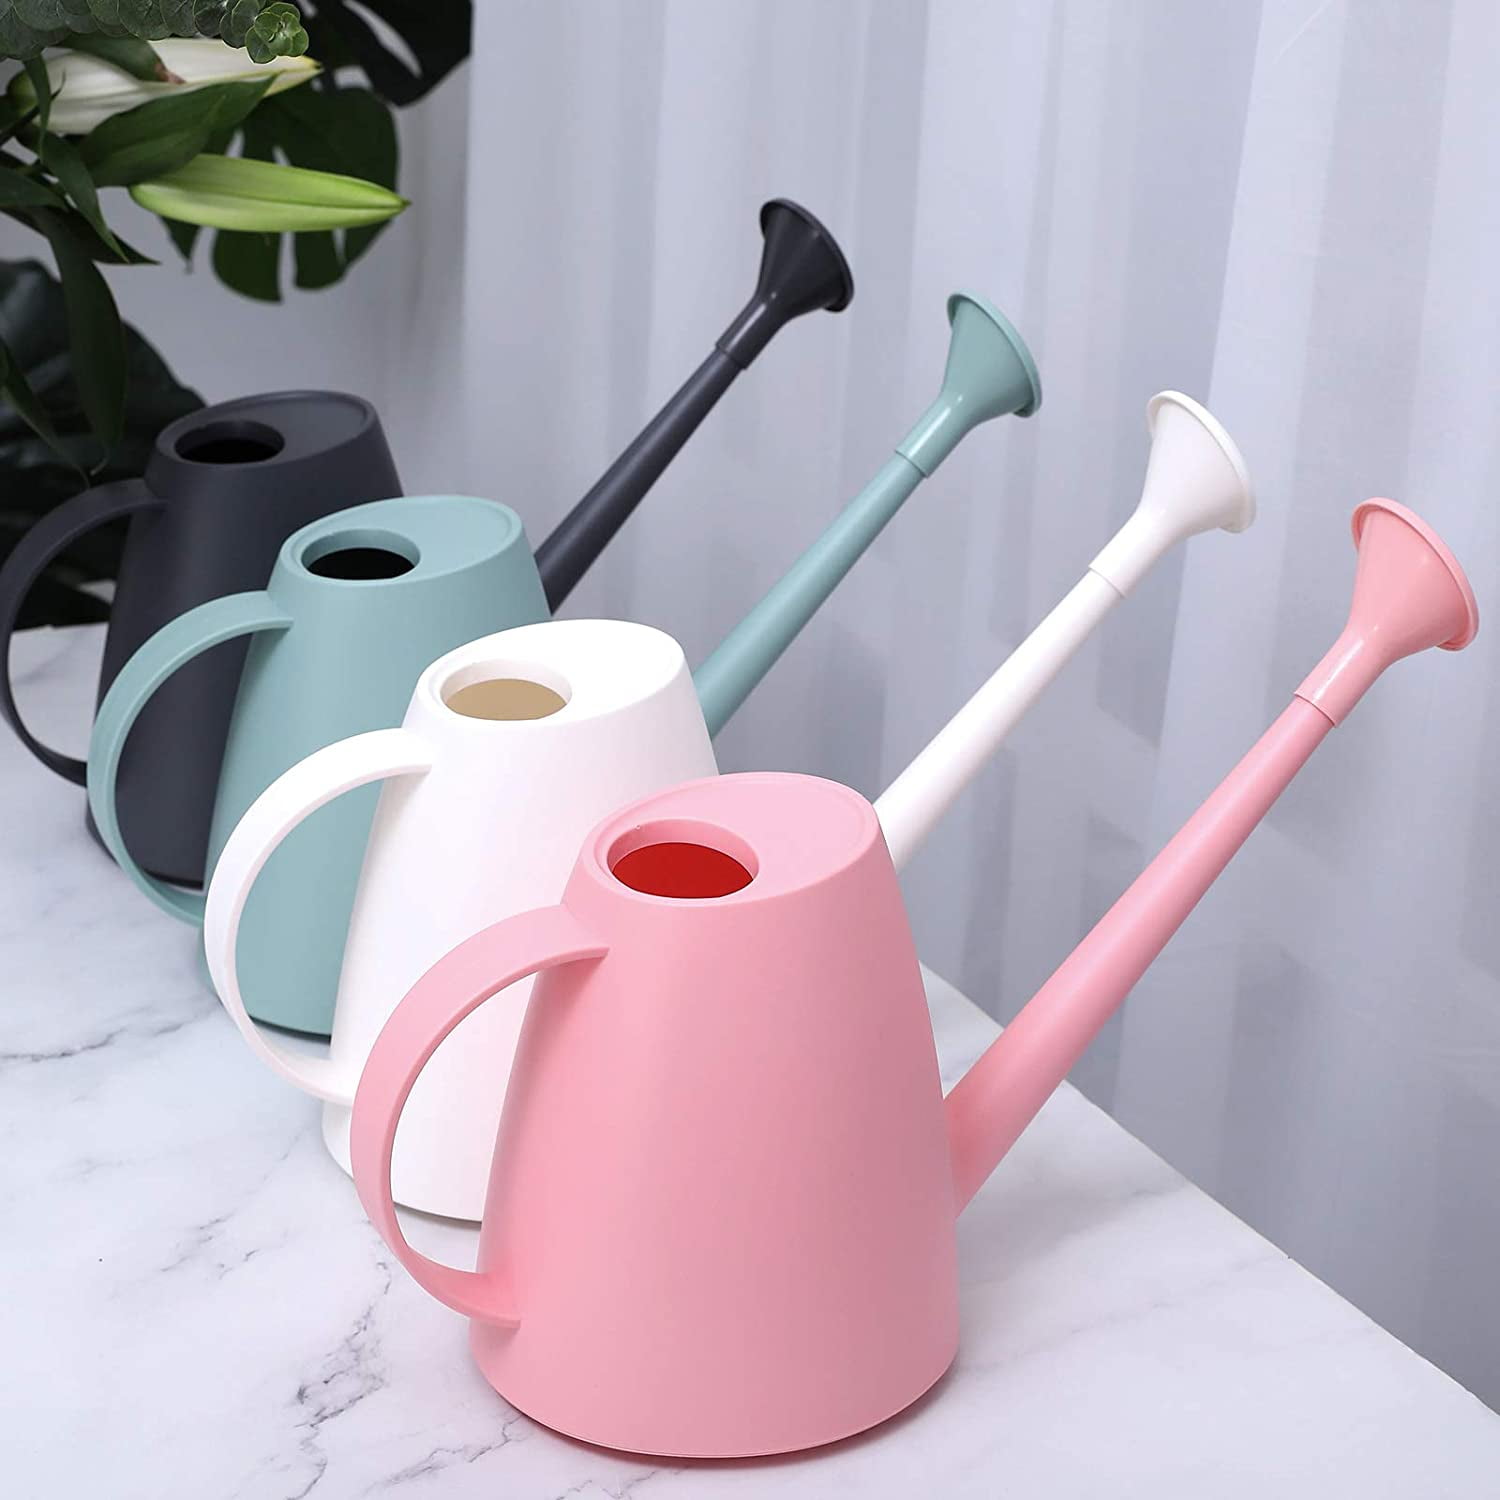 1 Gallon Watering Can with Detachable Shower Head for Outdoor and Indoor House Plants Flower Decorative Modern Garden Pot